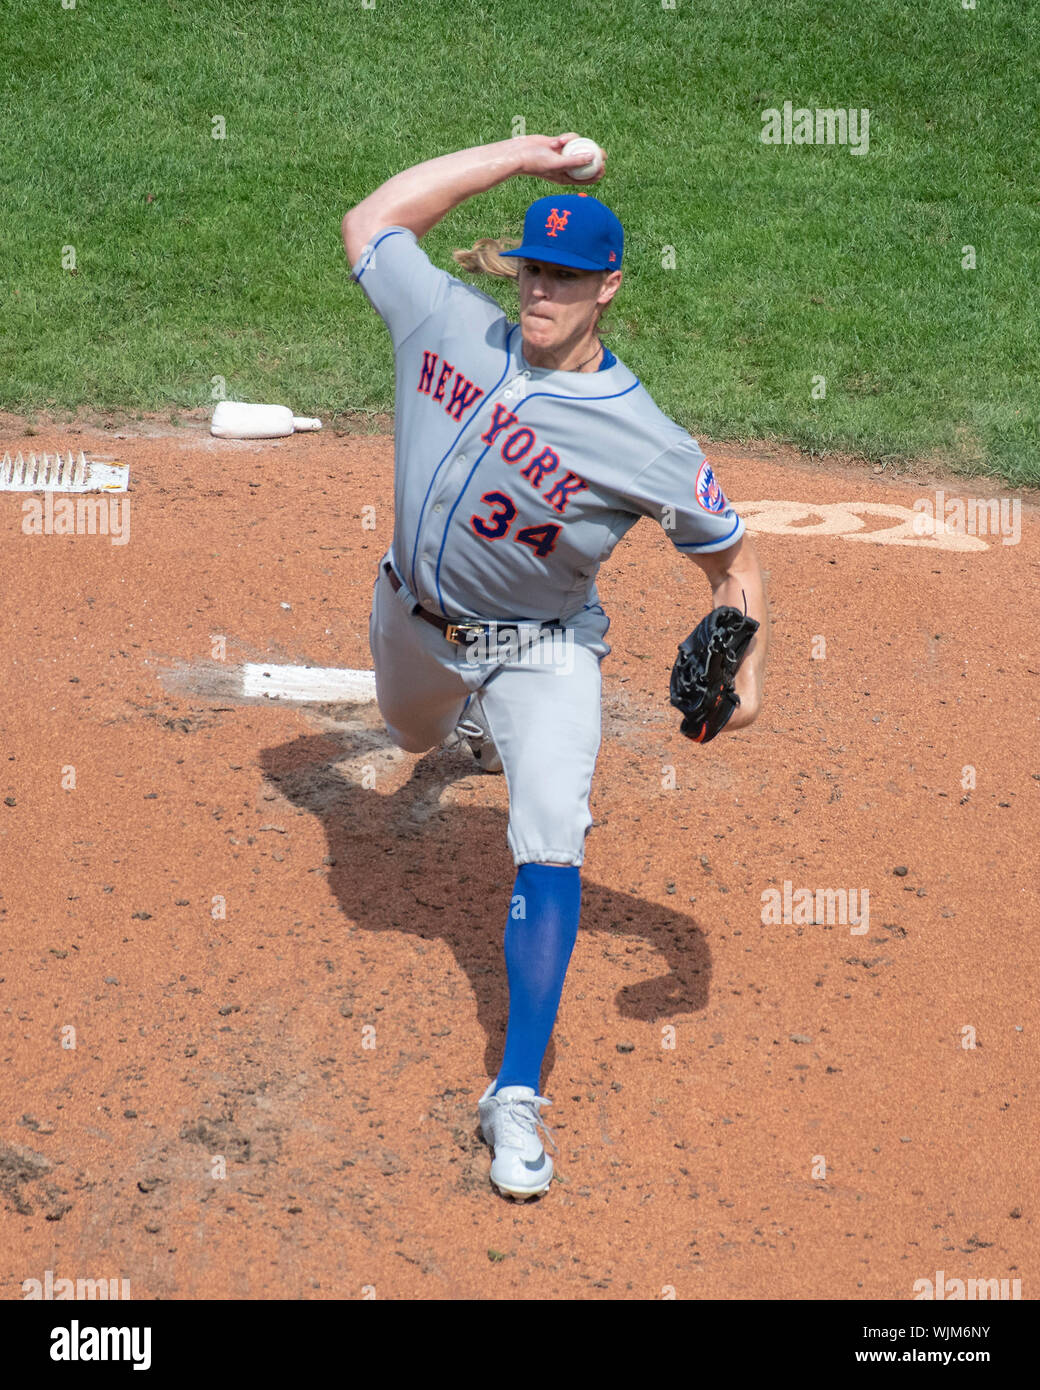 Washington, United States Of America. 02nd Sep, 2019. New York Mets starting pitcher Noah Syndergaard (34) works in the second inning against the Washington Nationals at Nationals Park in Washington, DC on Monday, September 2, 2019.Credit: Ron Sachs/CNP (RESTRICTION: NO New York or New Jersey Newspapers or newspapers within a 75 mile radius of New York City) | usage worldwide Credit: dpa/Alamy Live News Stock Photo